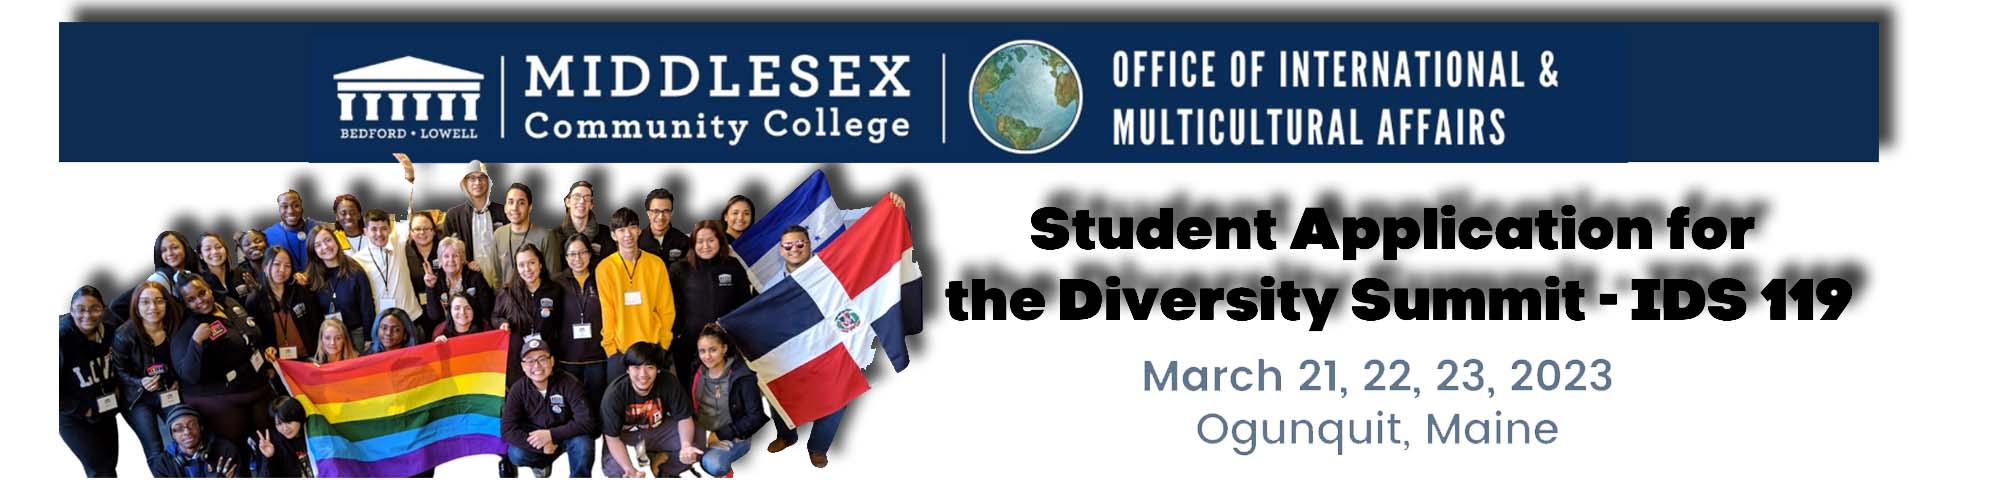 Diversity Summit banner with dates of event and photo of MCC students holding flags